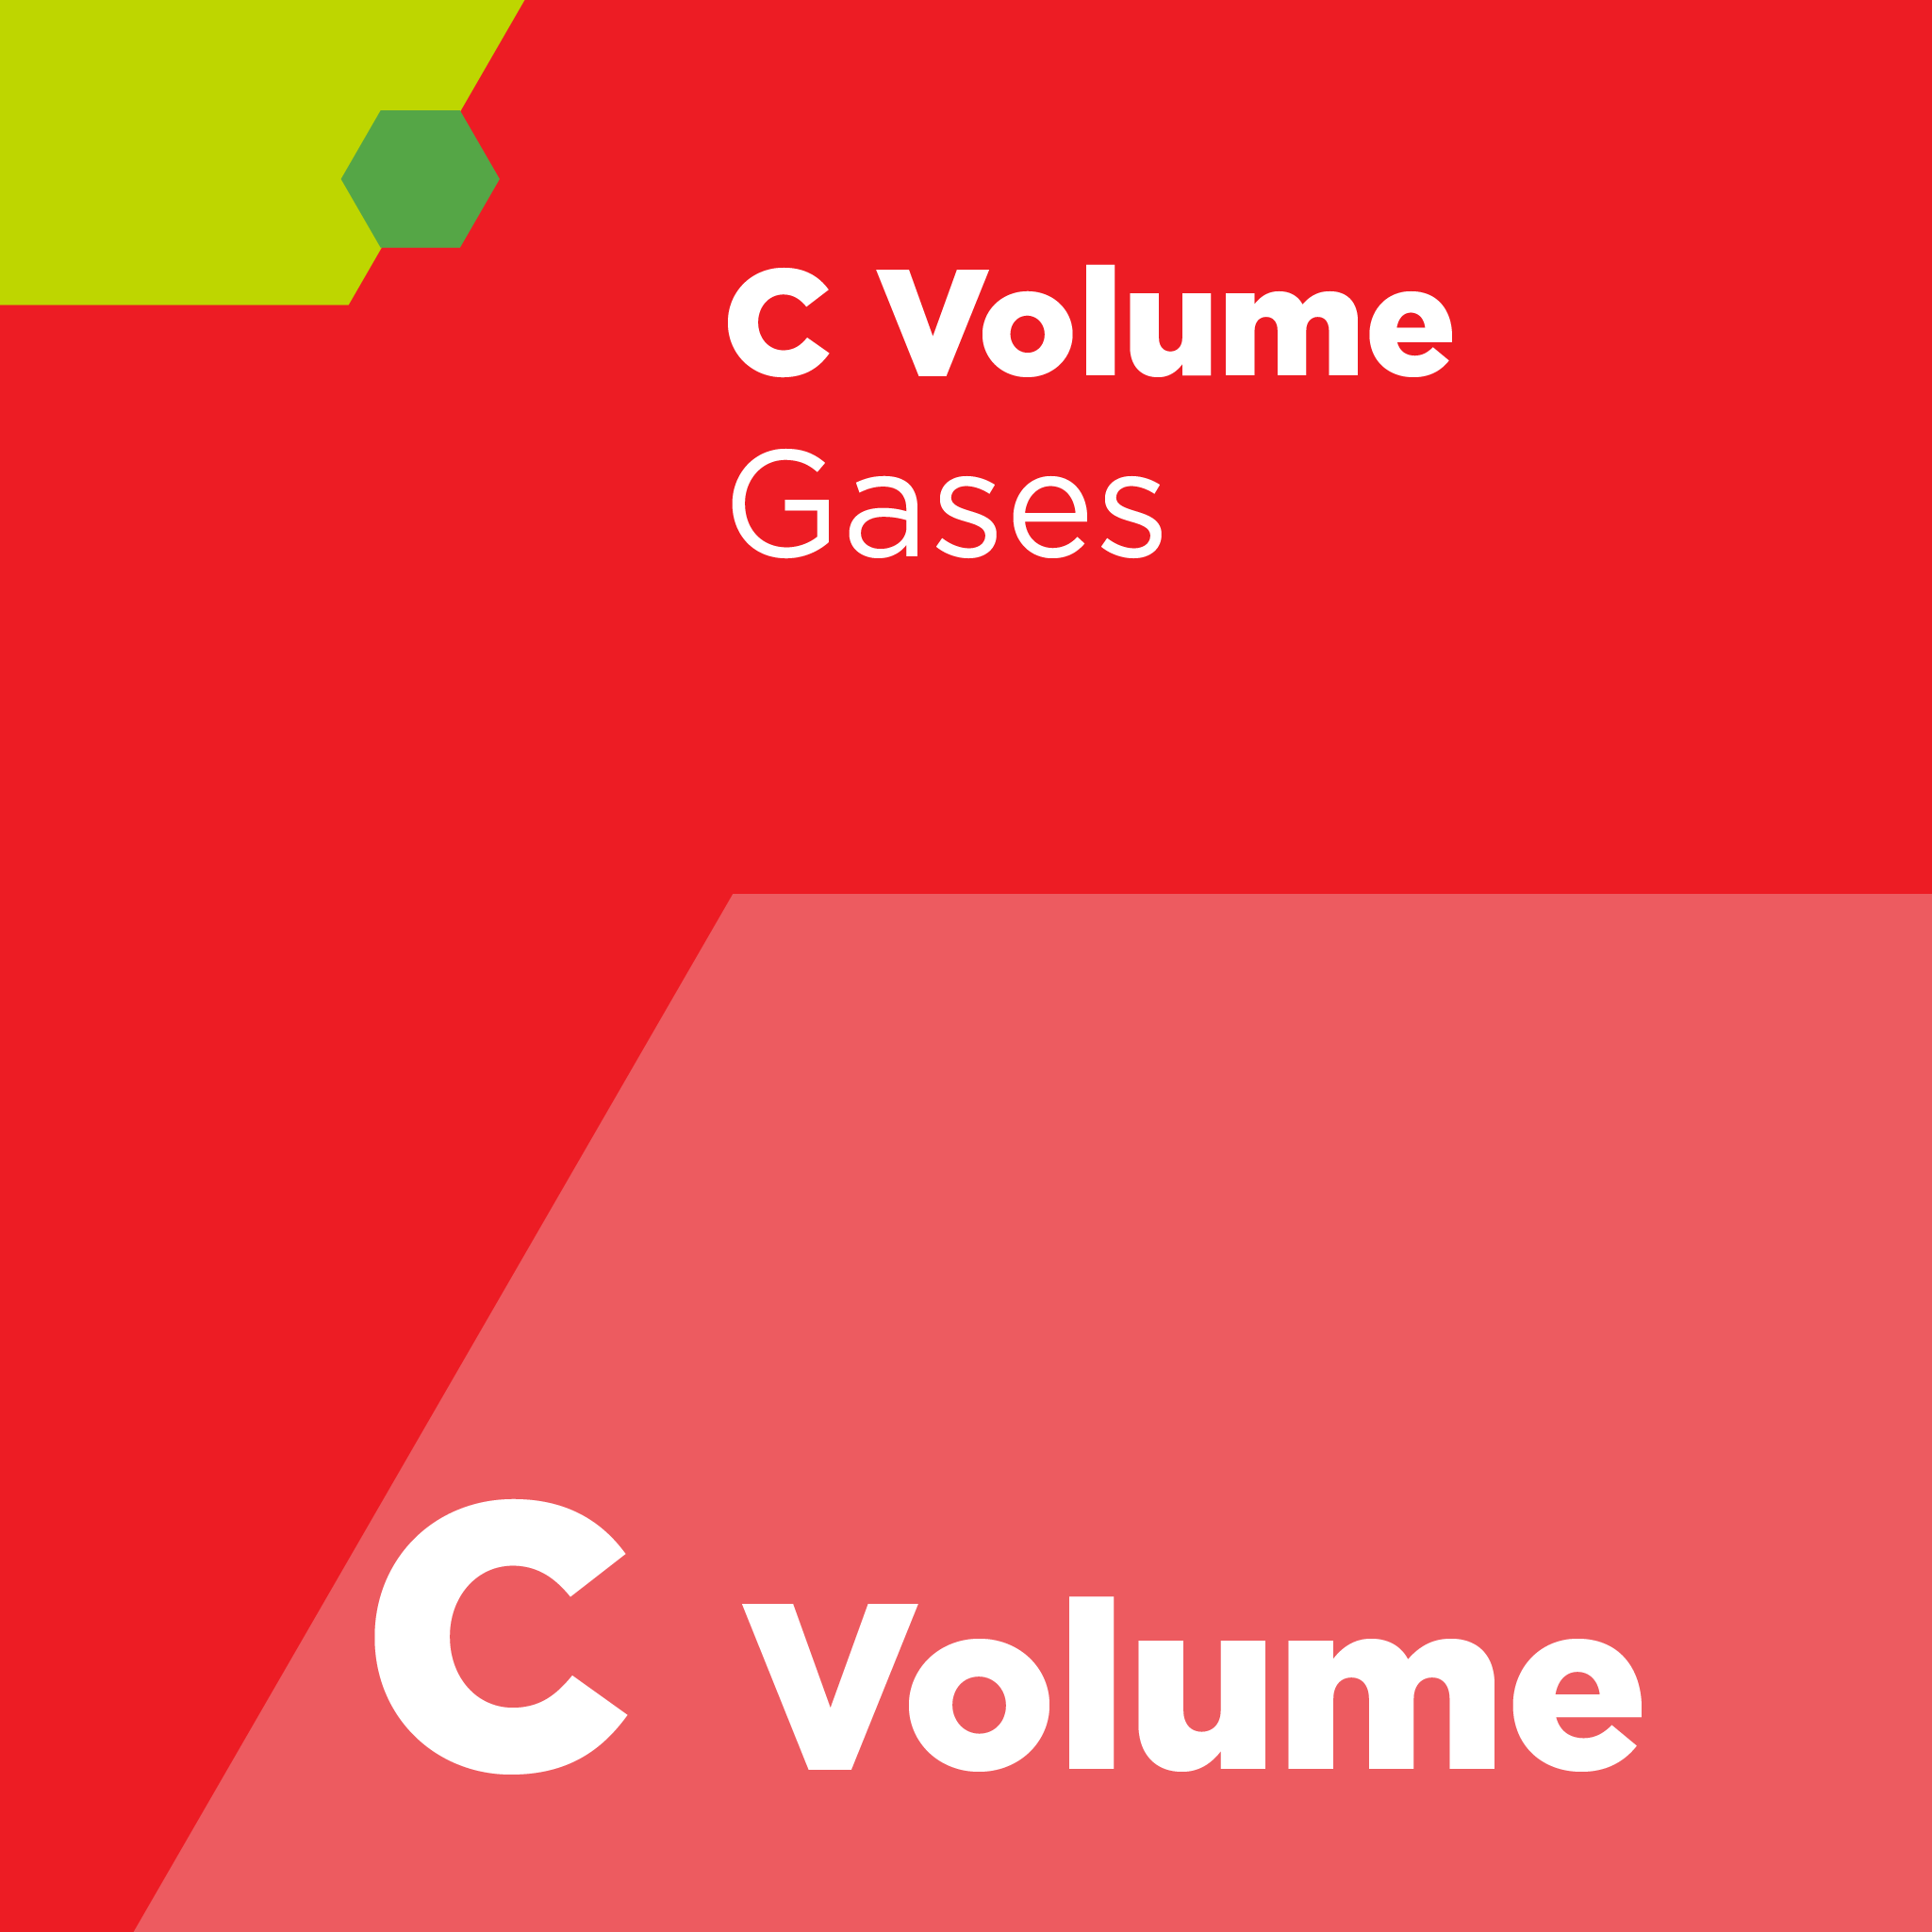 C00306 - SEMI C3.6 - Specification for Phosphine (PH3) in Cylinders, 99.98% Quality